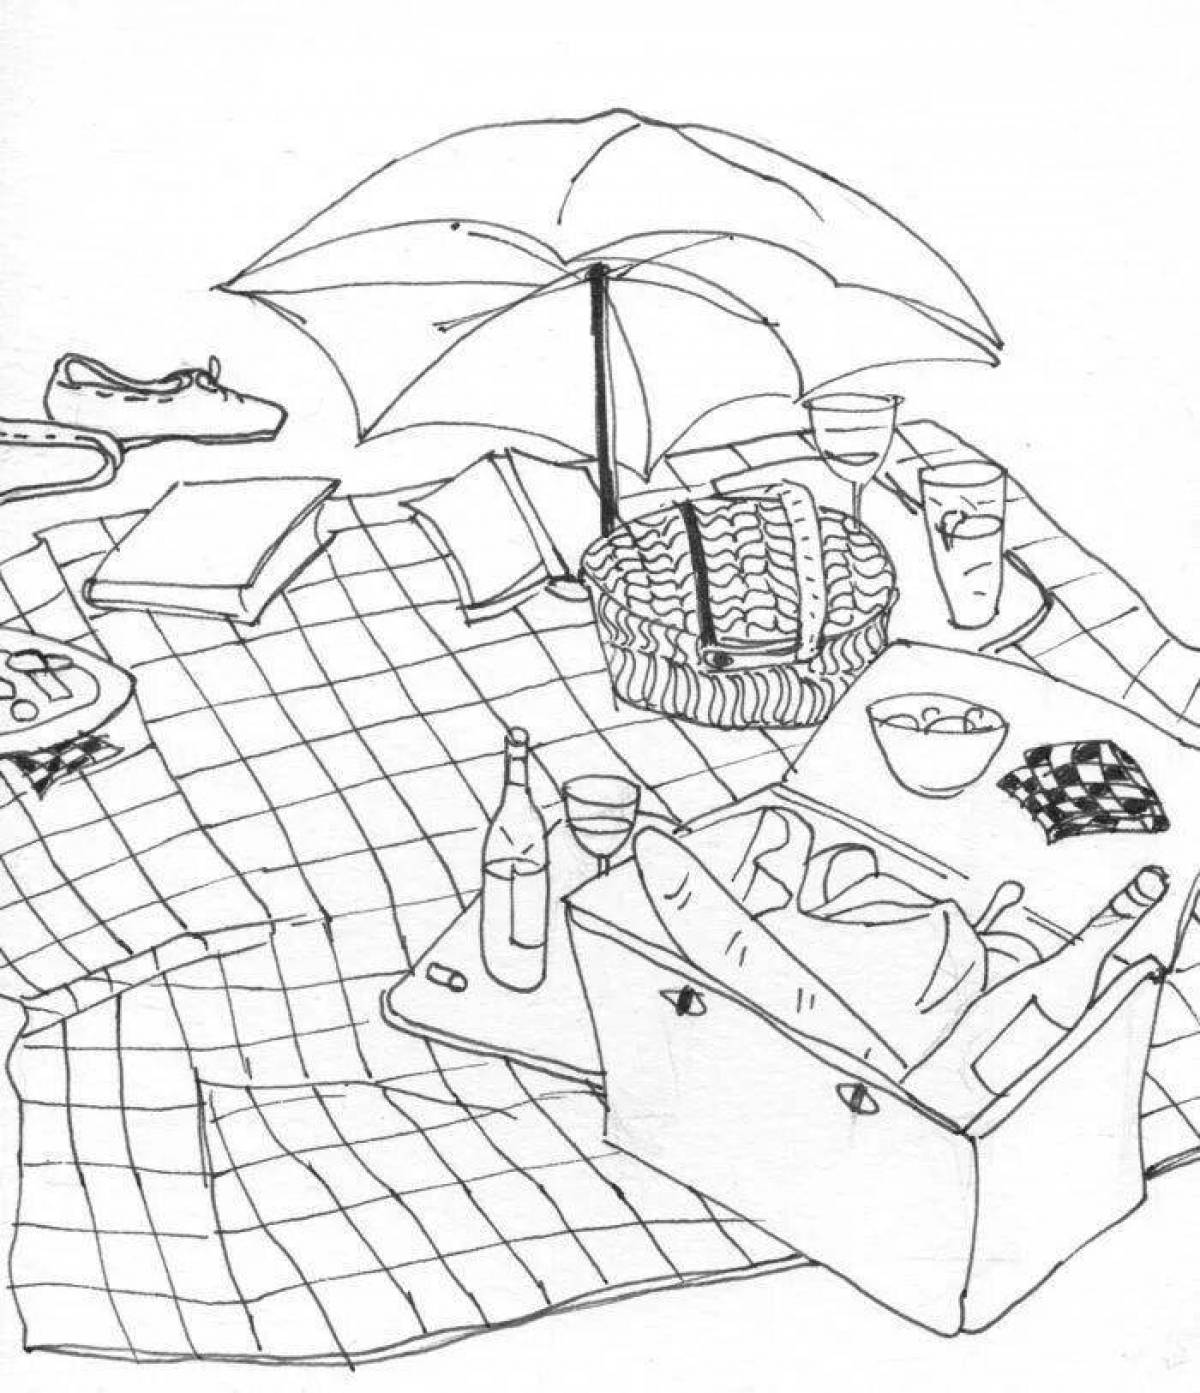 Coloring for a picnic